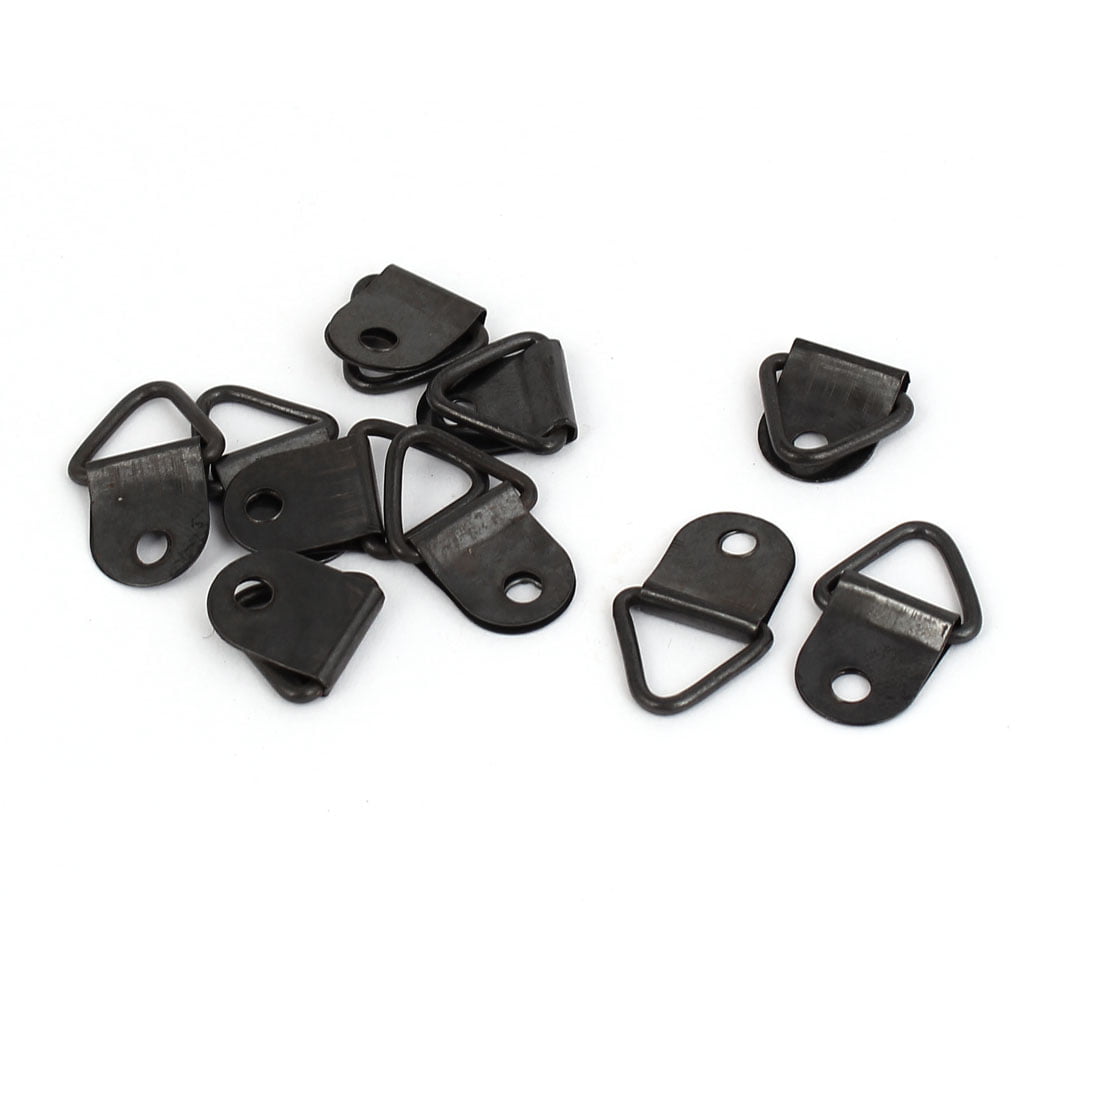 Frame Triangle Ring Hanger - 100 Pack - Small D-Ring Picture Hanger with  Screws - Picture Hang Solutions - Amazon.com